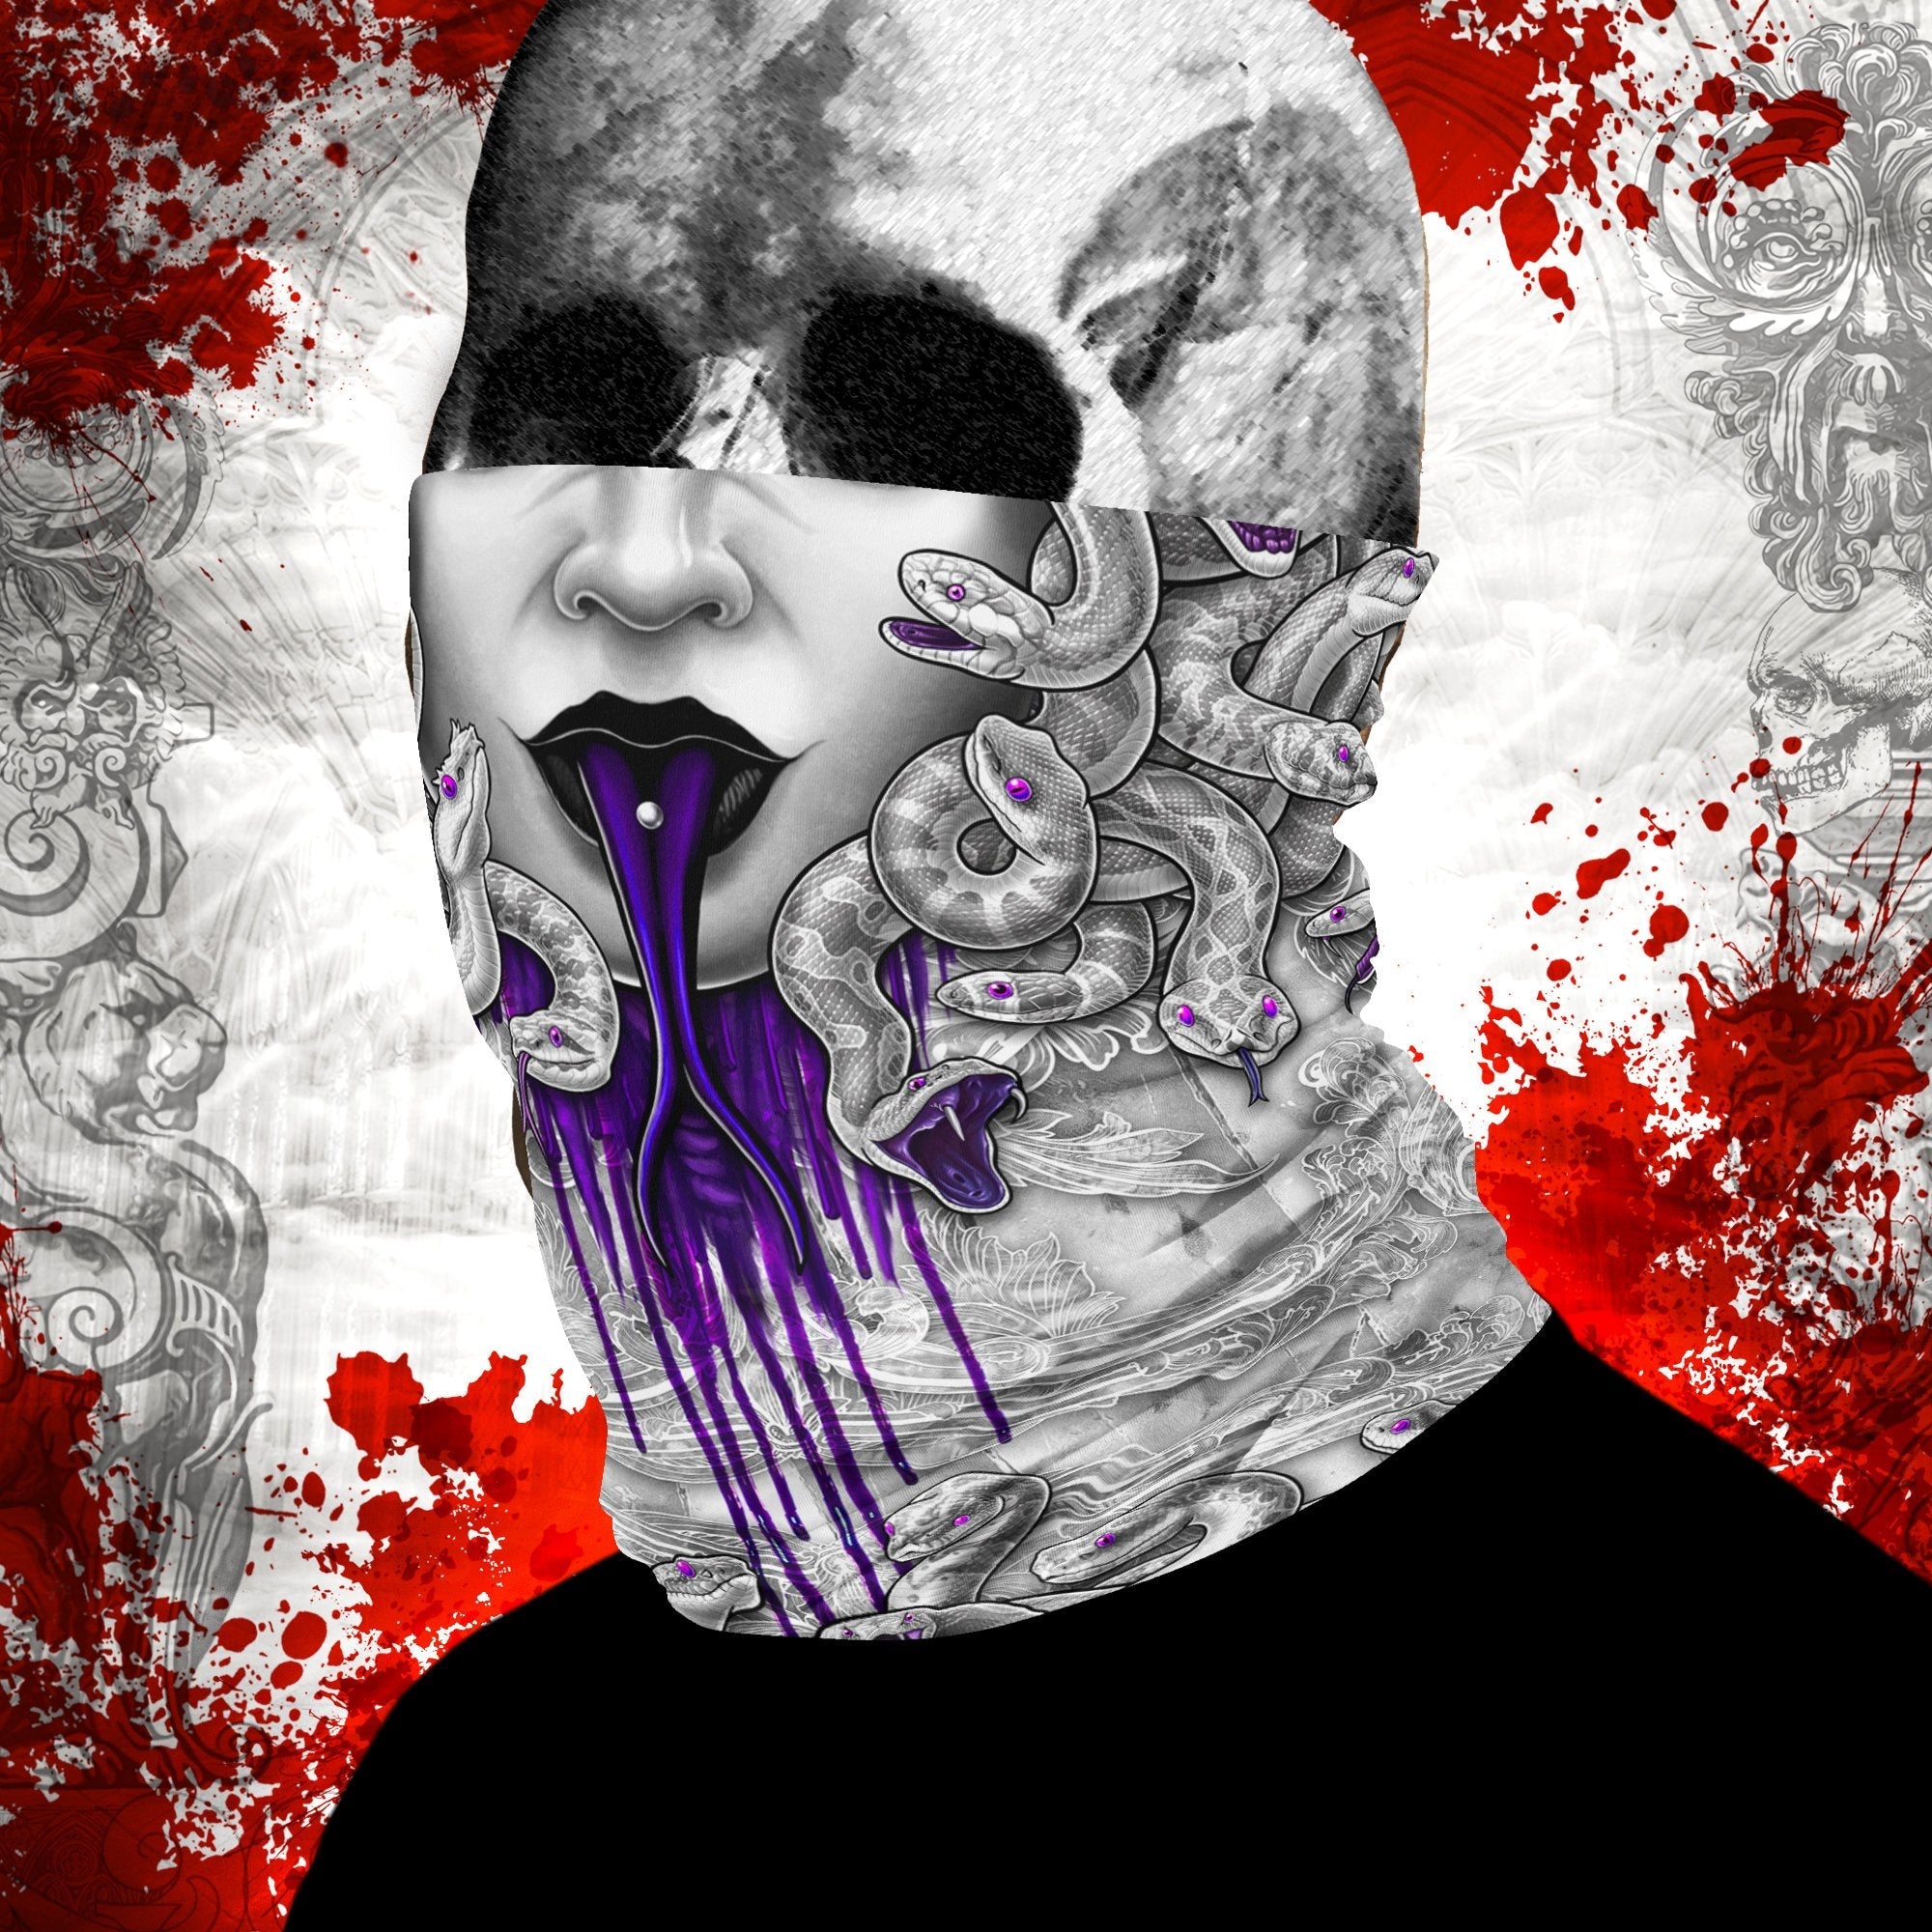 Medusa Neck Gaiter, Face Mask, Head Covering, Snakes Headband, Skull, Gothic, Horror Outfit - White Goth & Purple, 4 Face Options - Abysm Internal